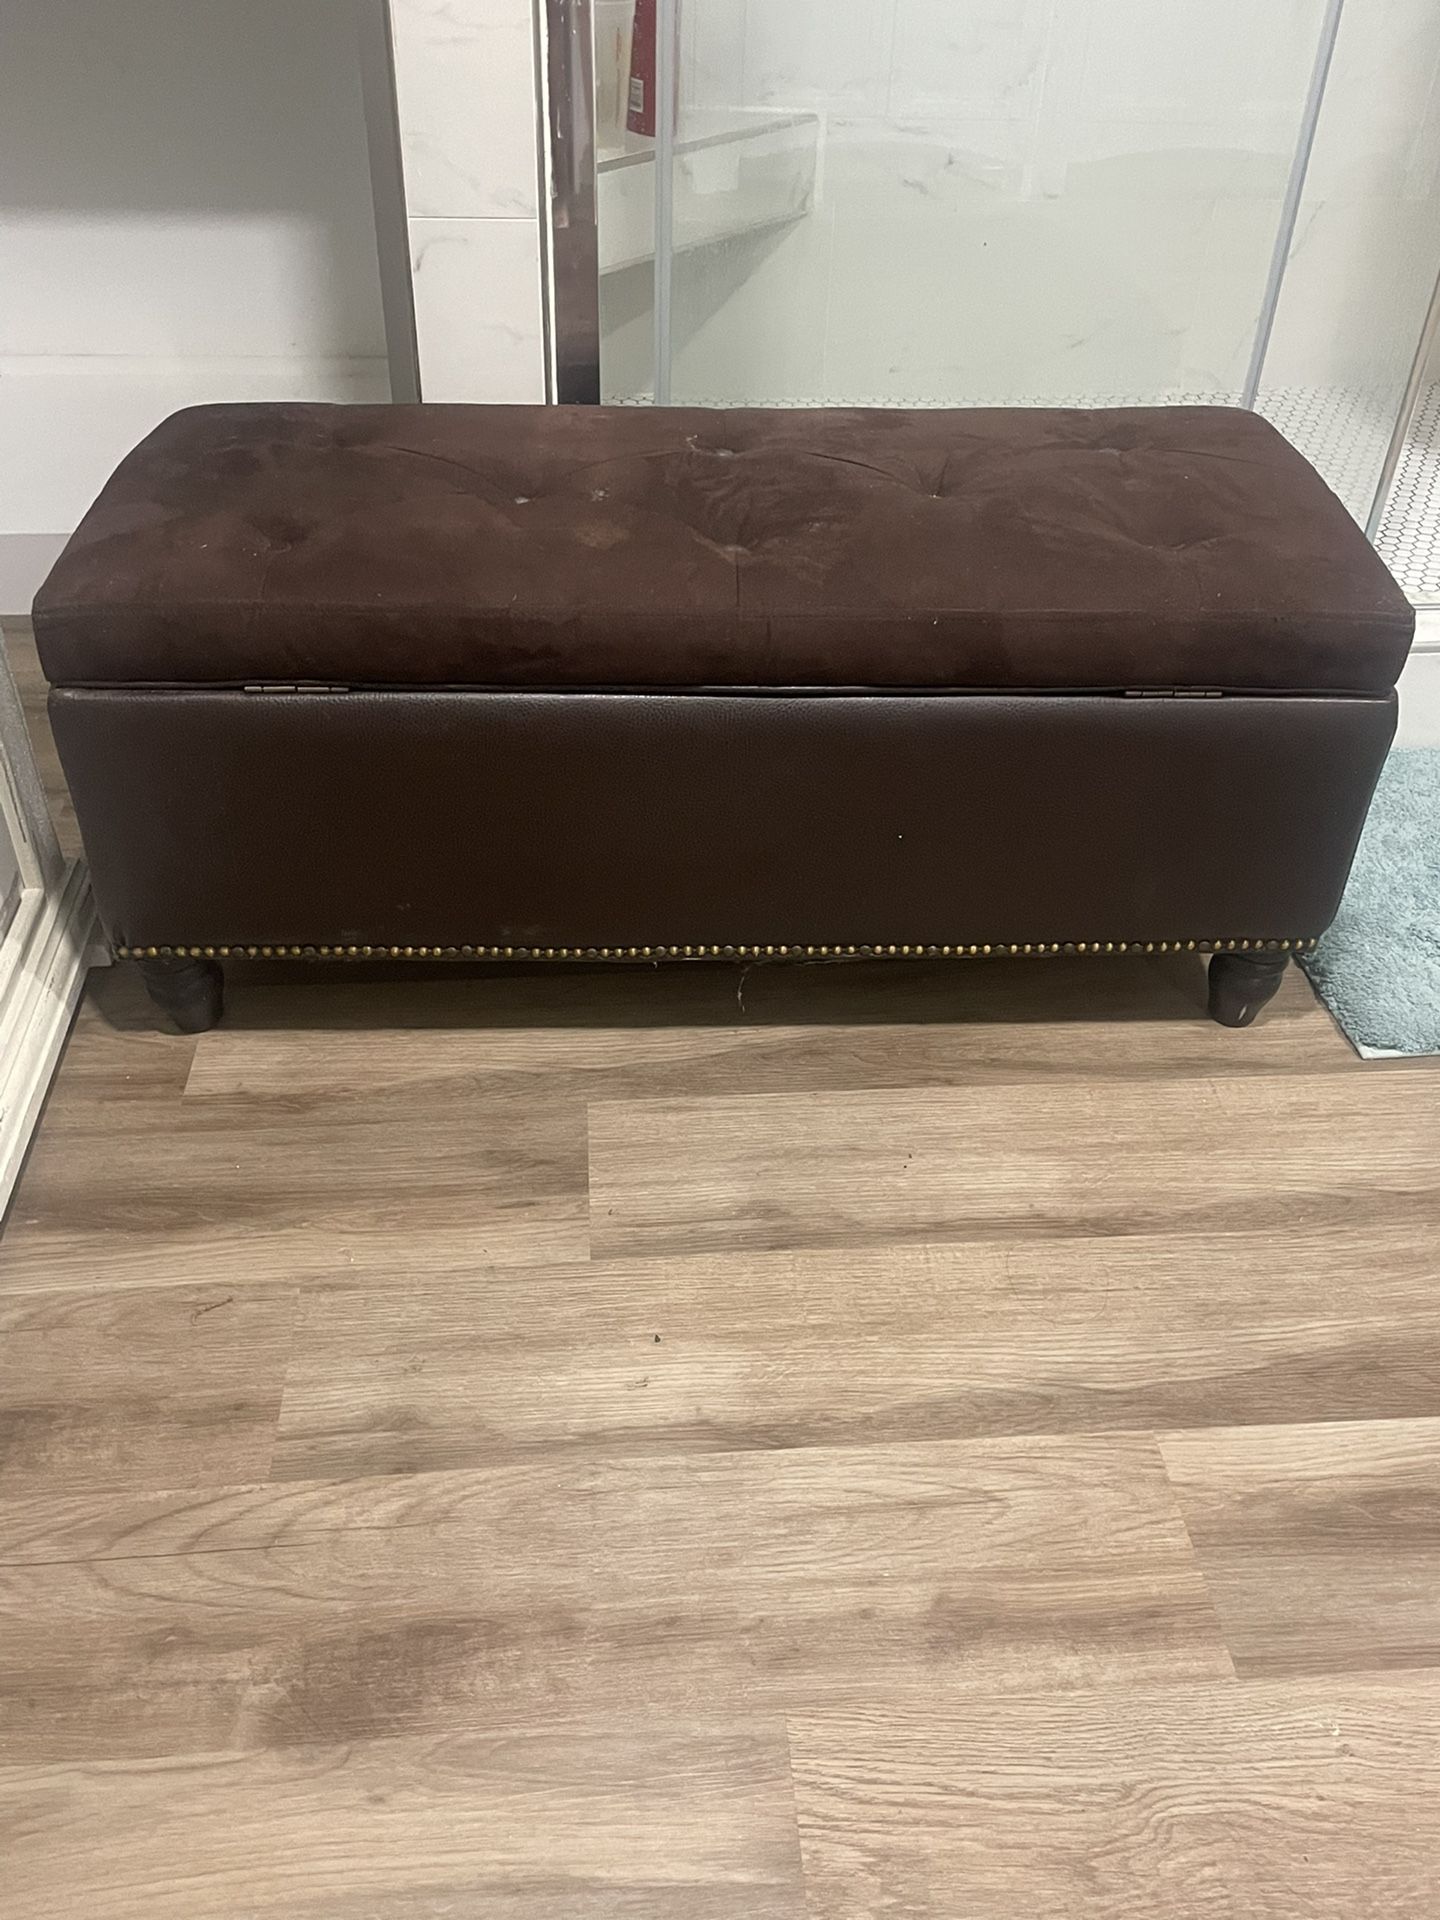 Brown leather Ottoman $60